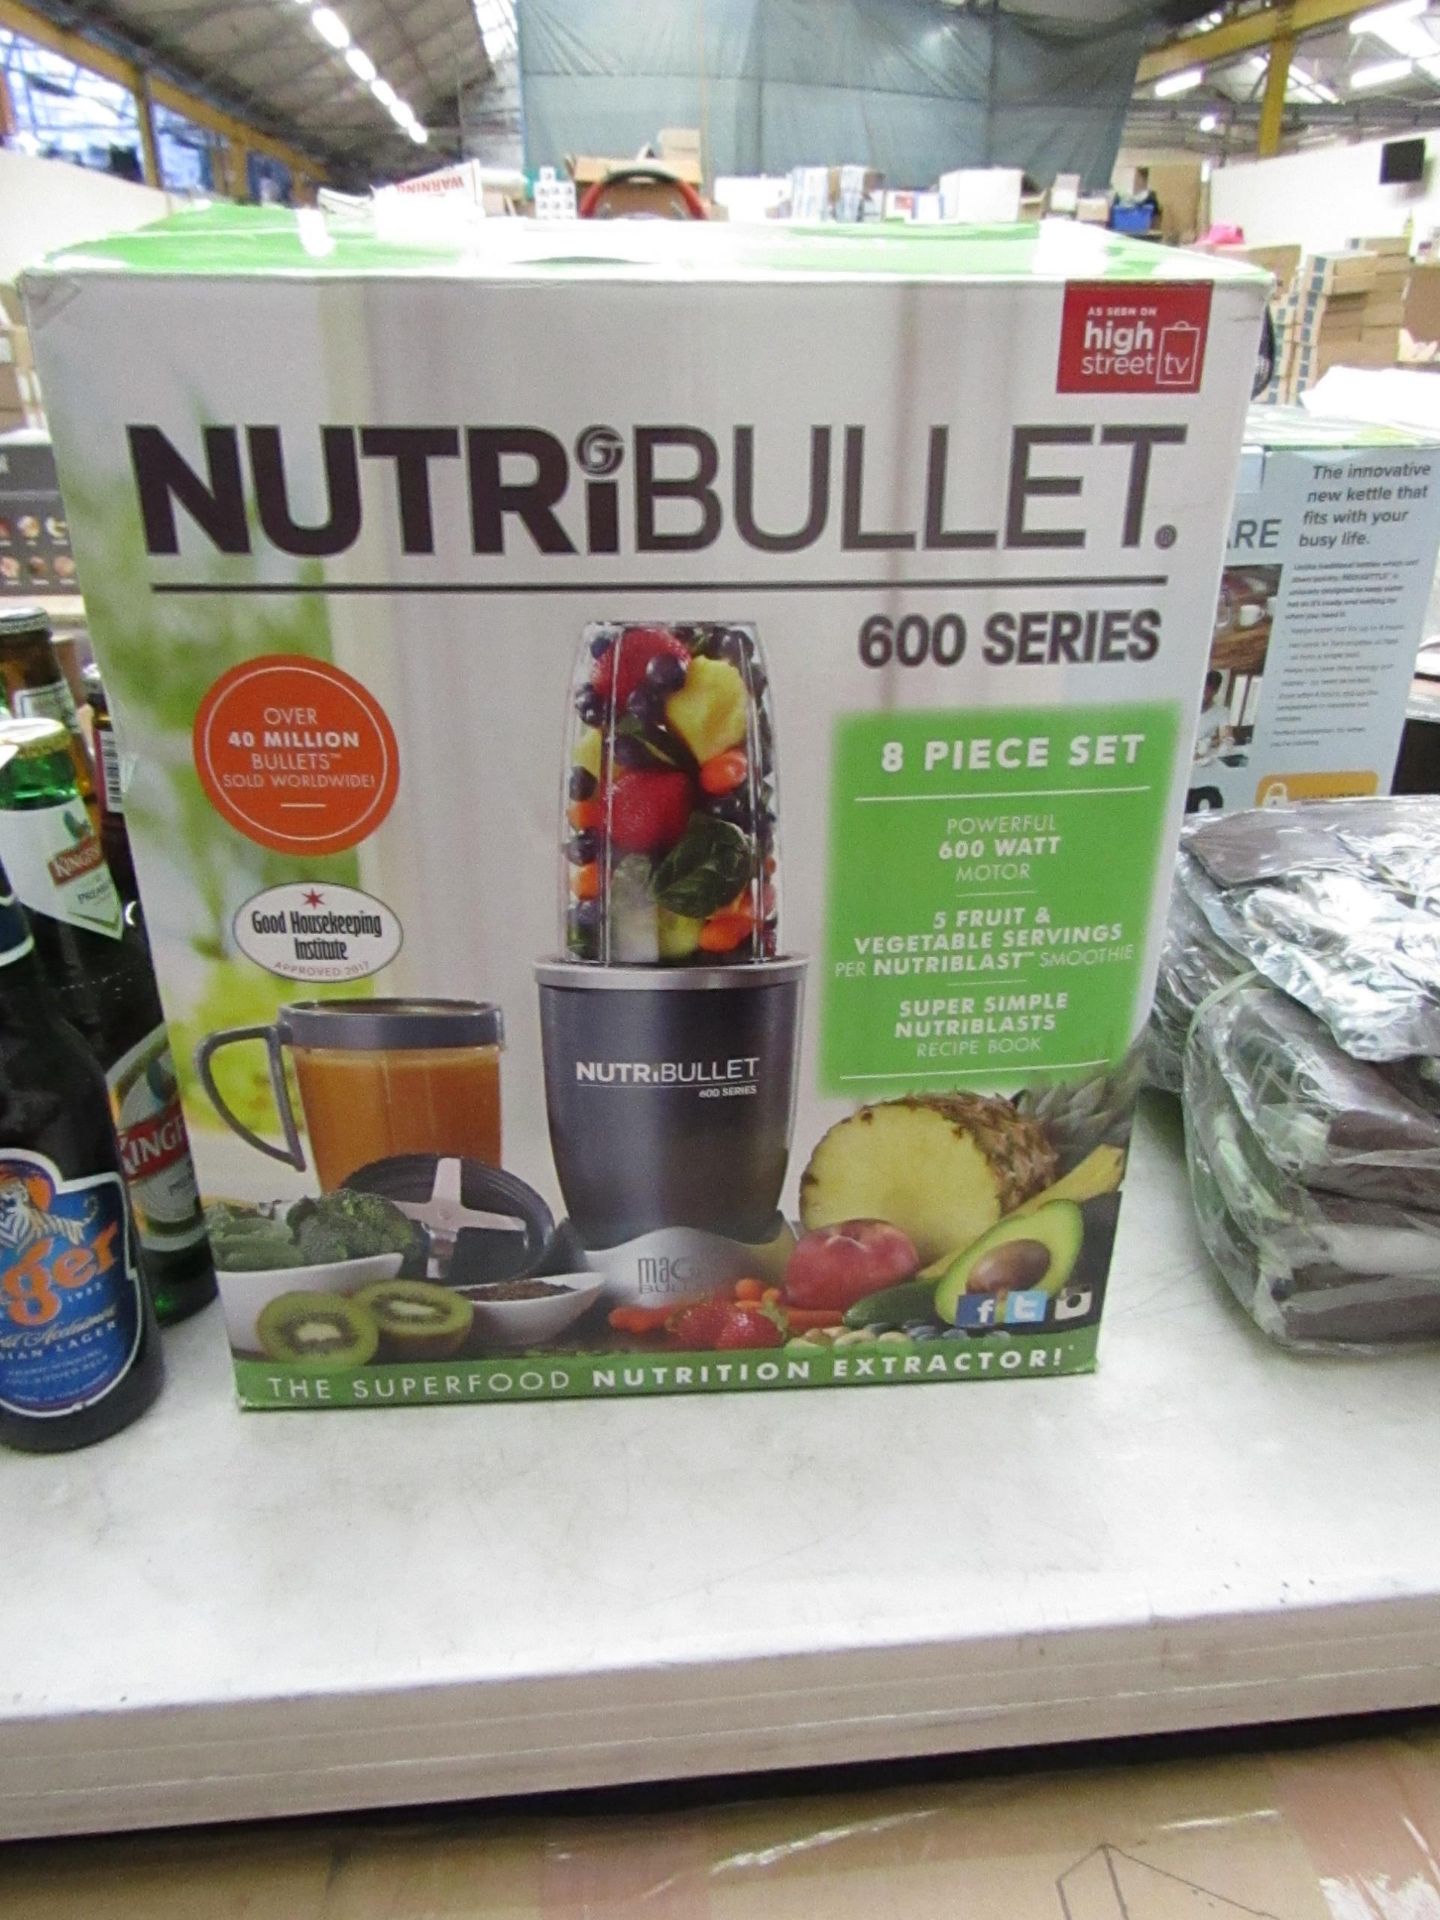 | 1X | NUTRIBULLET 600 SERIES | UNCHECKED AND BOXED | NO ONLINE RE-SALE | SKU C5060191464321 |